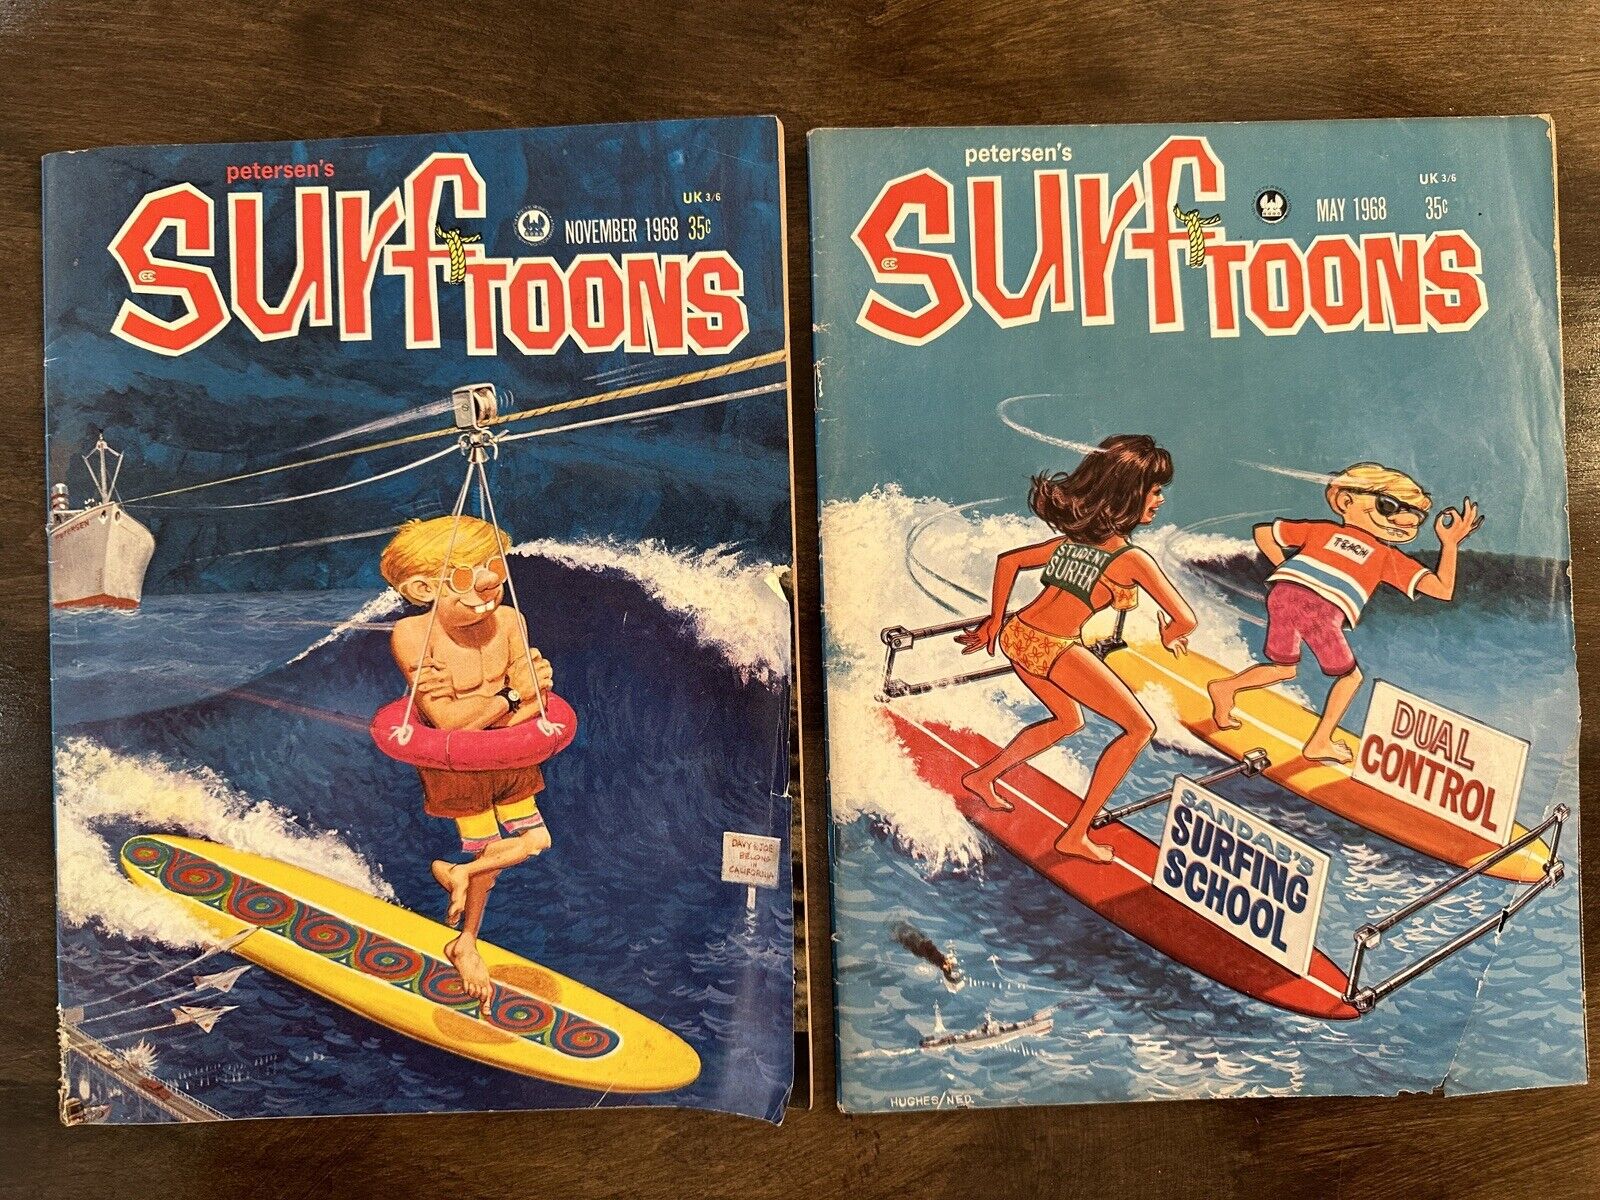 VTG Peterson SURF toons Magazine 2 Issues 1968 May November